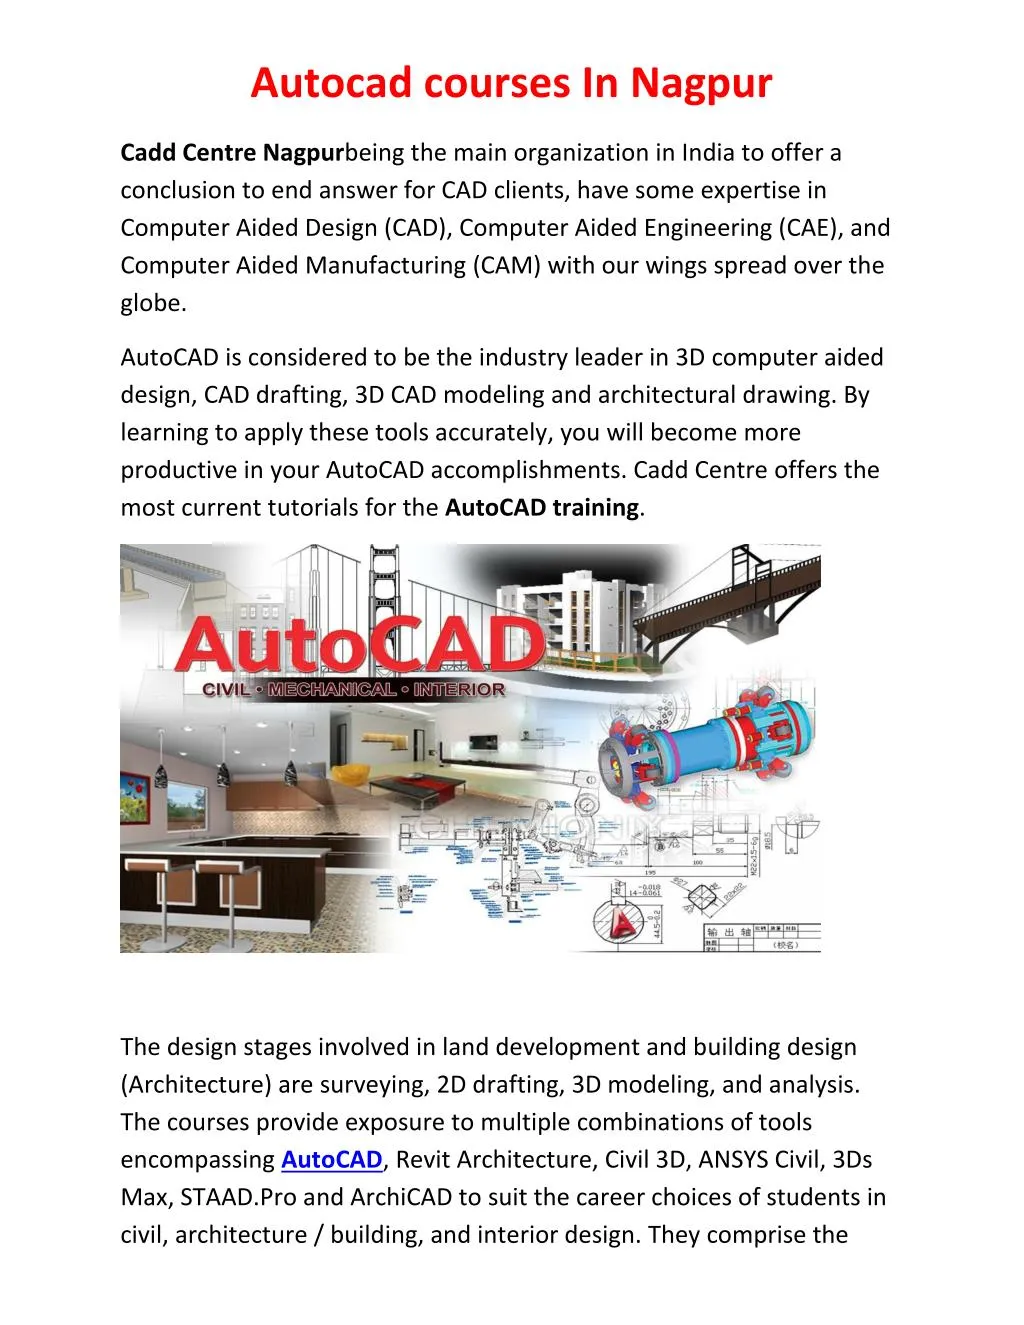 Ppt Autocad Courses In Nagpur Powerpoint Presentation Id 7315257 - autocad courses in nagpur powerpoint ppt presentation